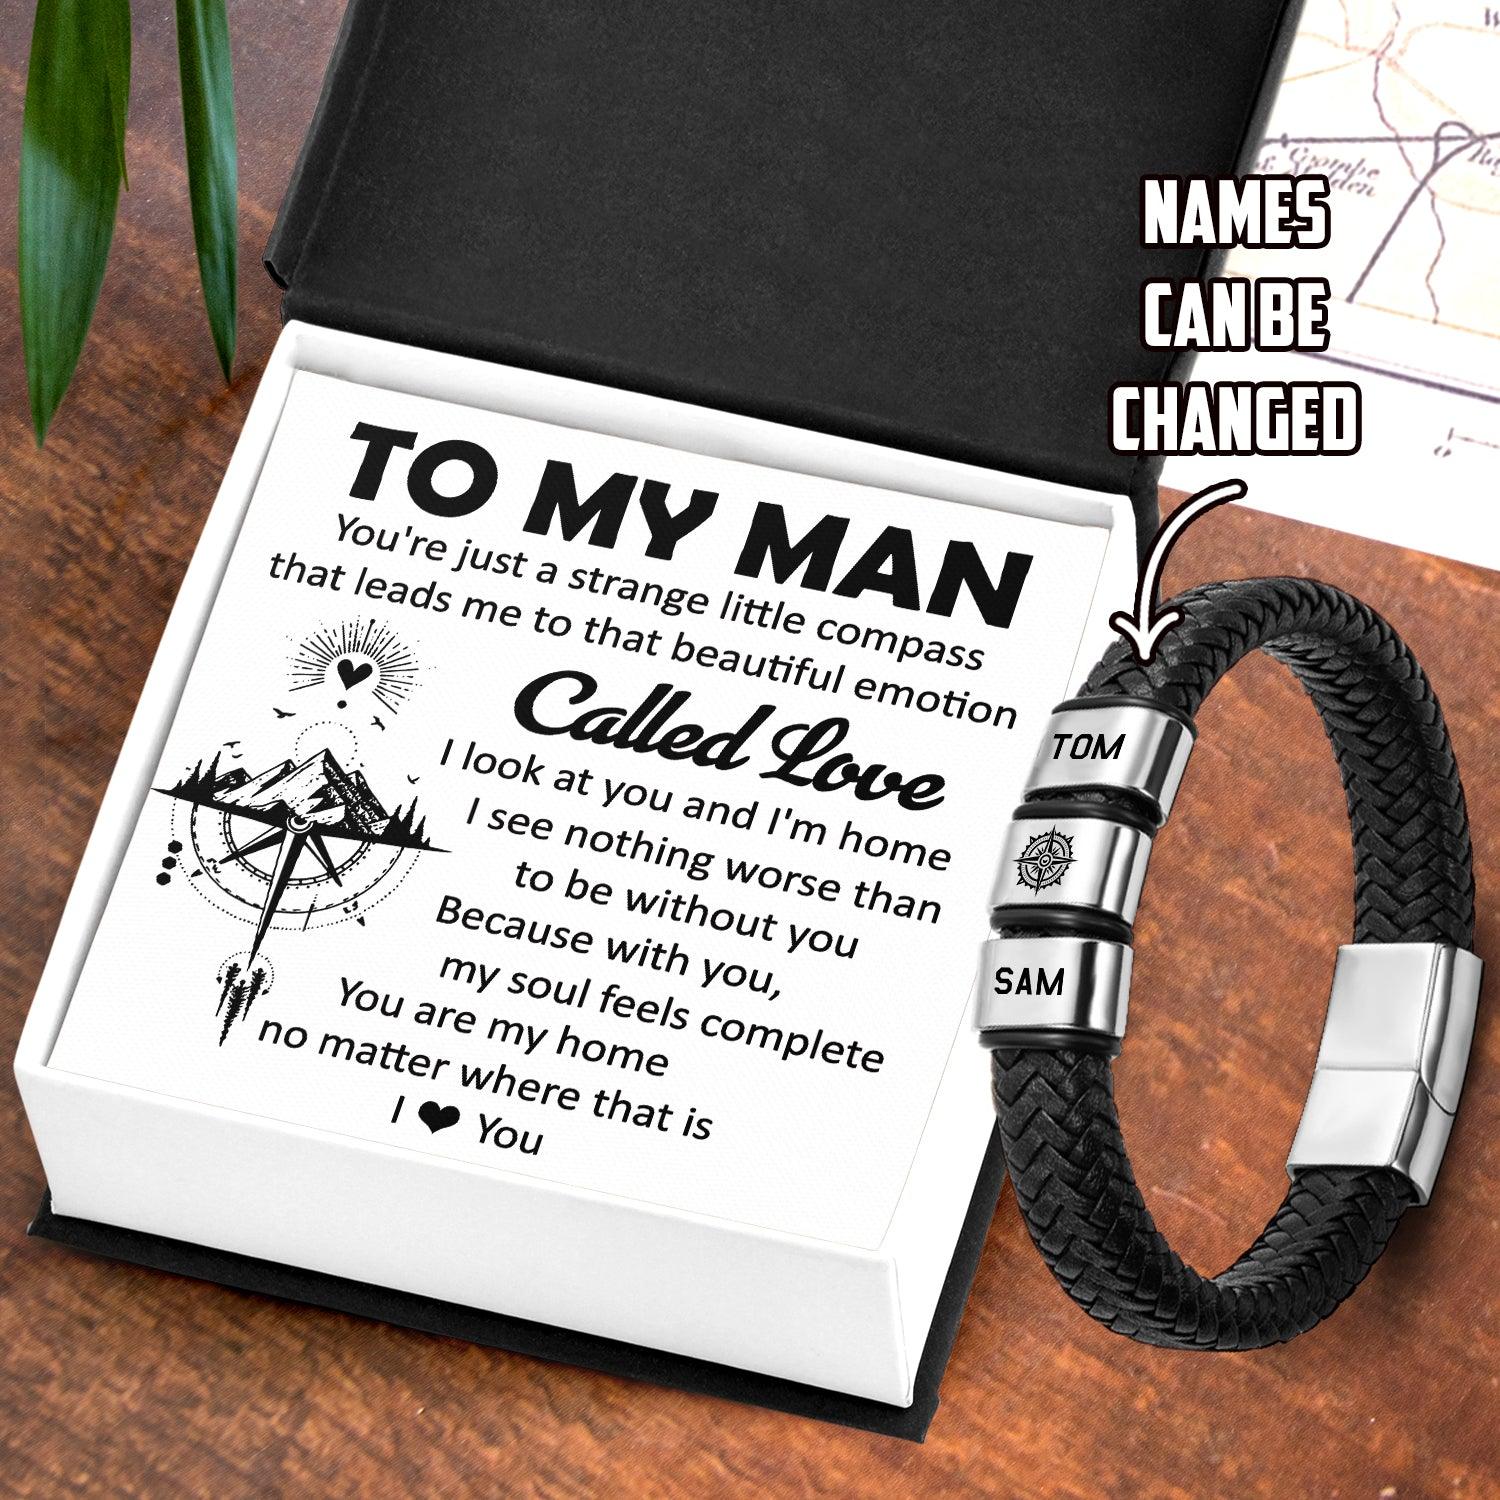 Personalized Leather Bracelet - Hiking - To My Man - I Look At Home And I Am Home - Augbzl26034 - Gifts Holder